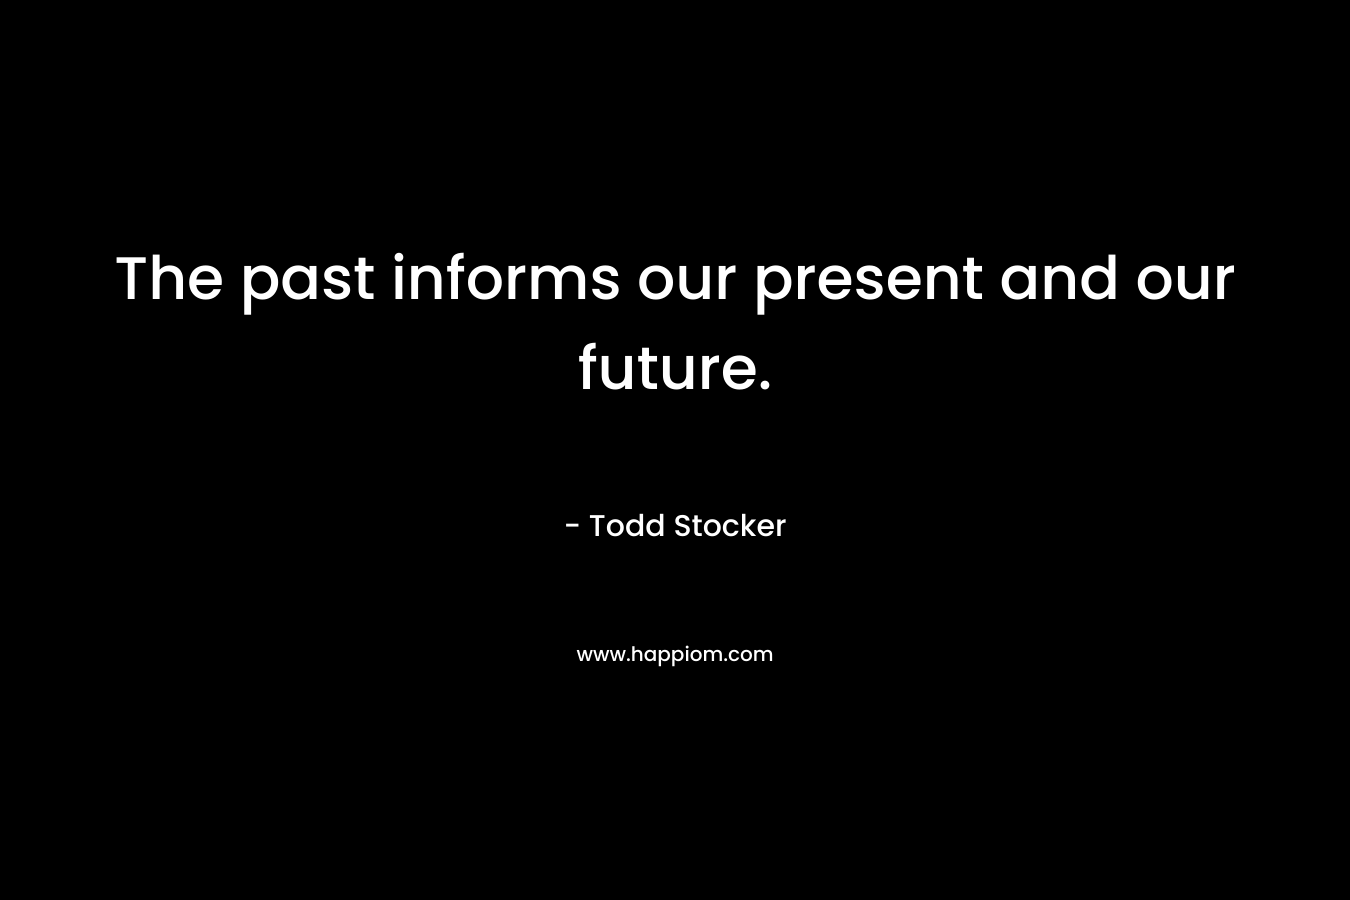 The past informs our present and our future.